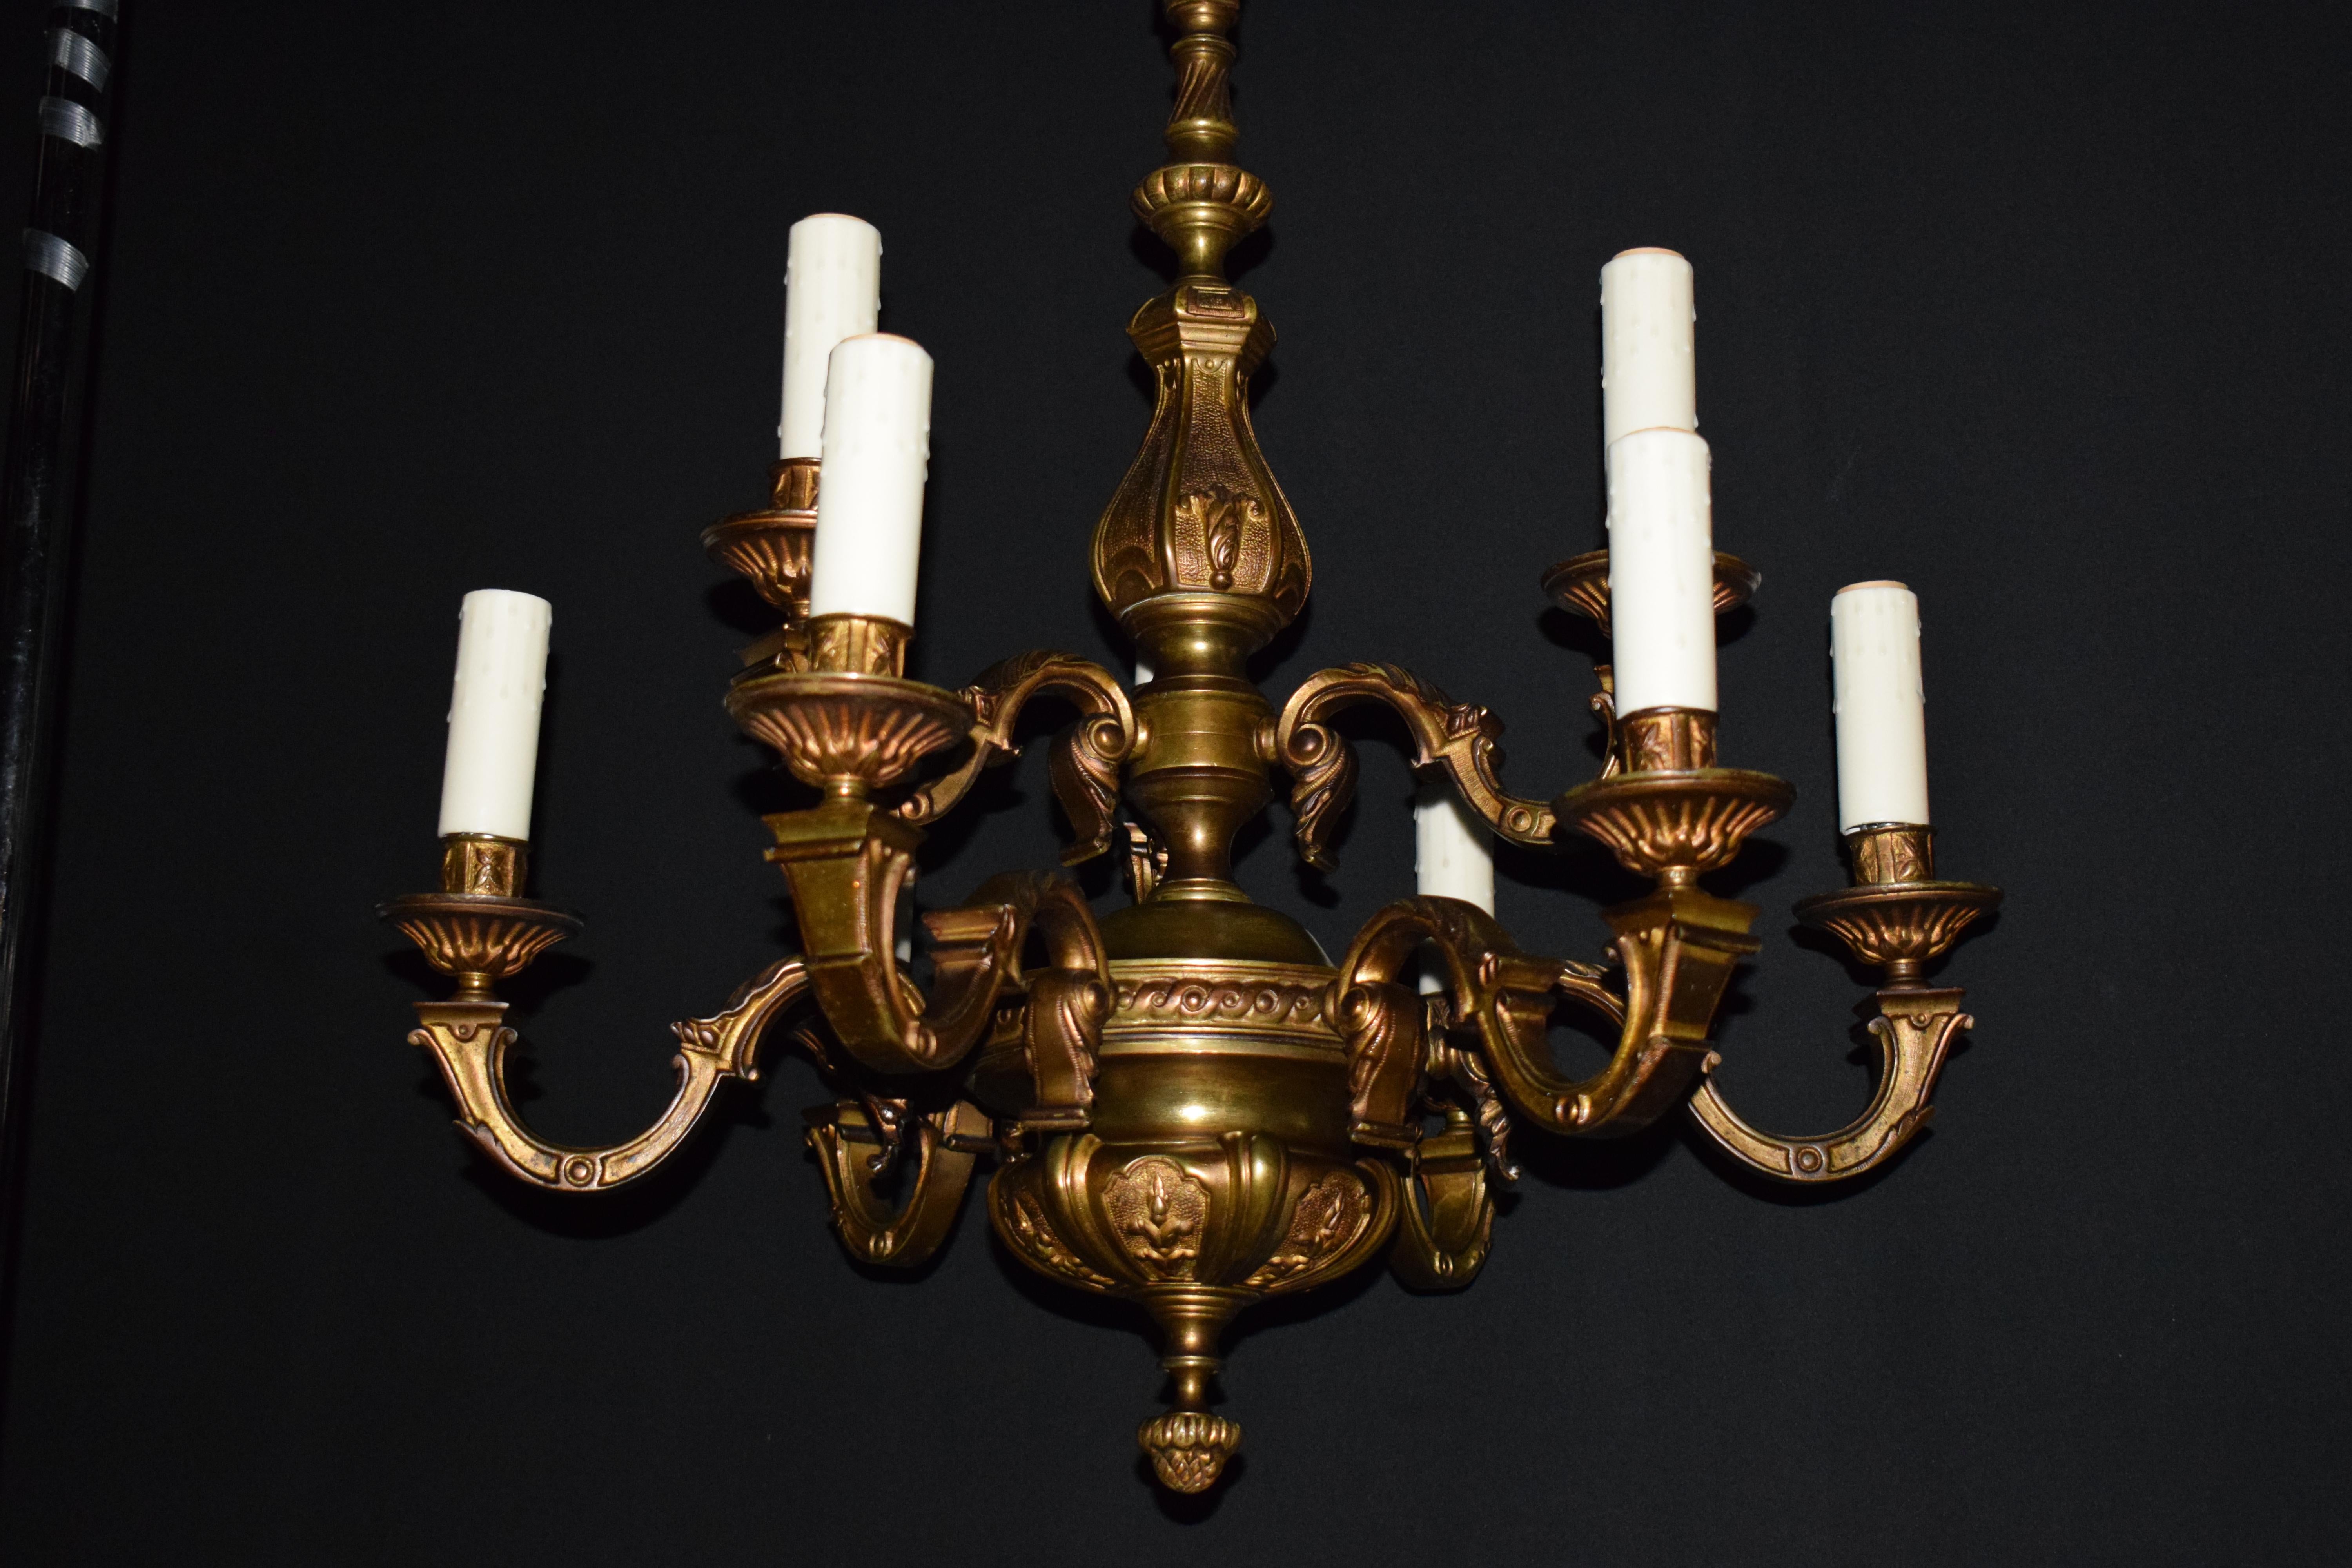 A fine two-tiered bronze chandelier, France, circa 1930

Dimensions:
H 28